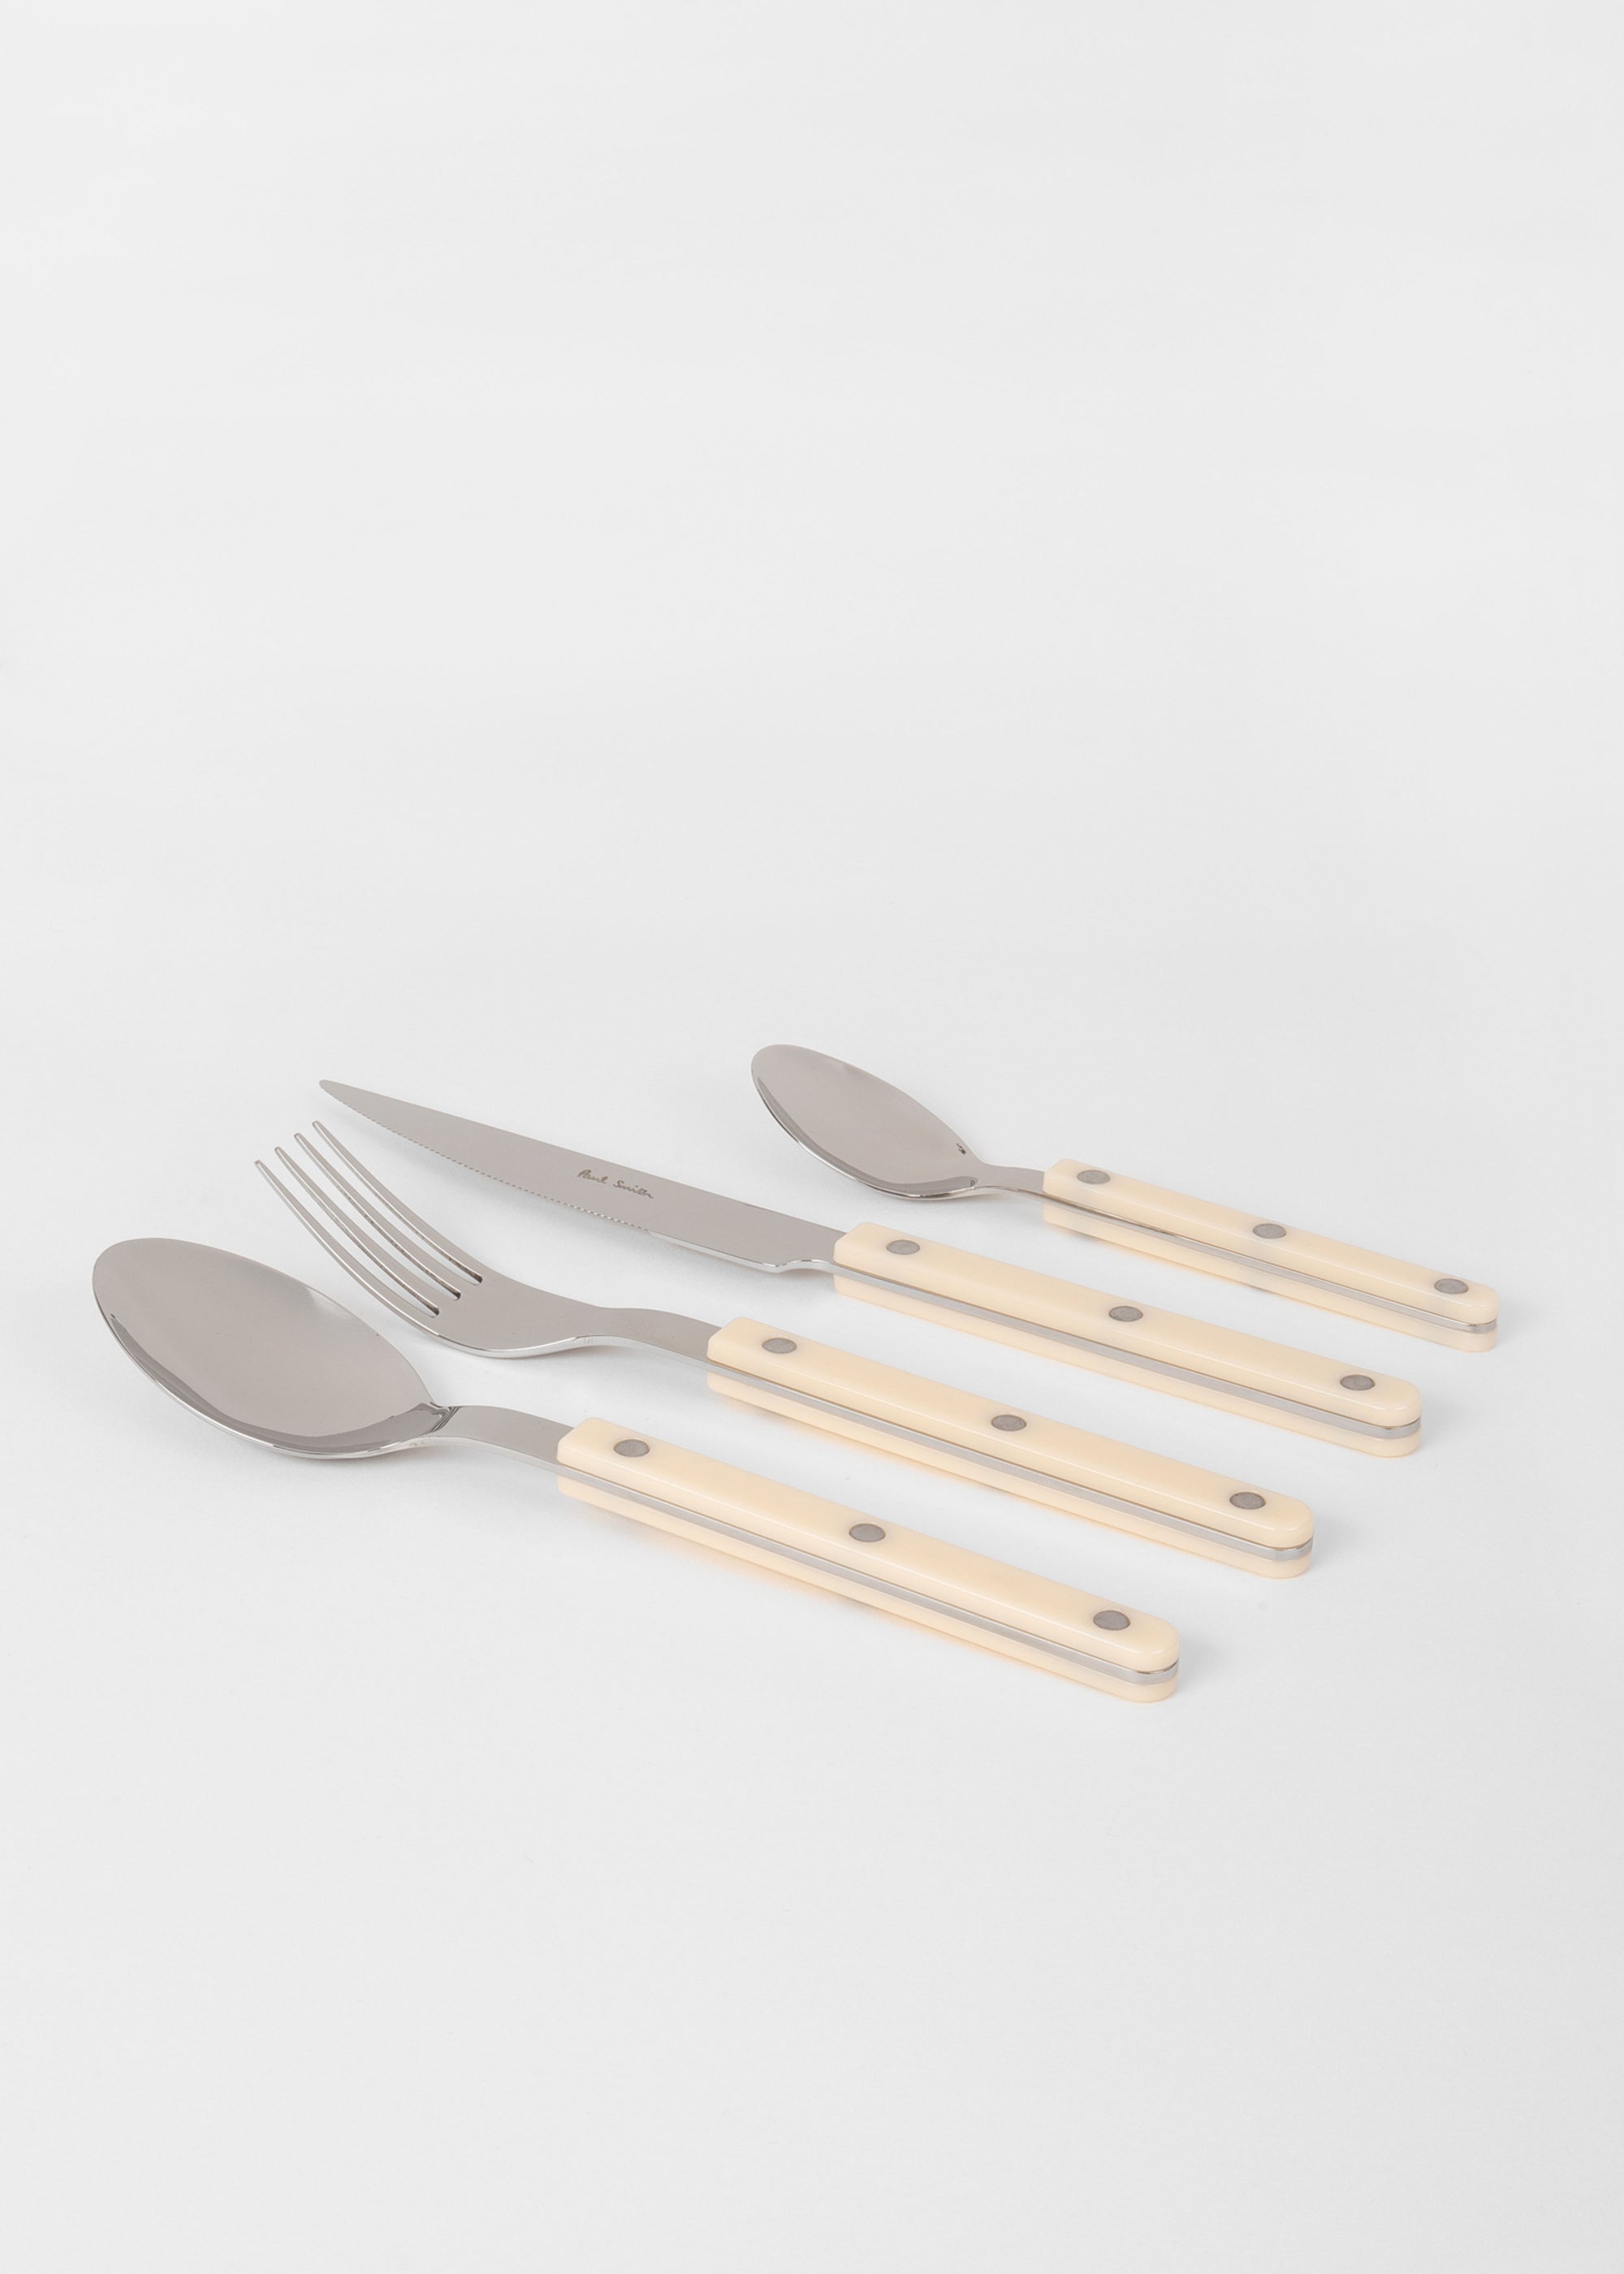 Cutlery Set of 4 pieces  - Bistrot Ivory - Cigale &  Fourmi